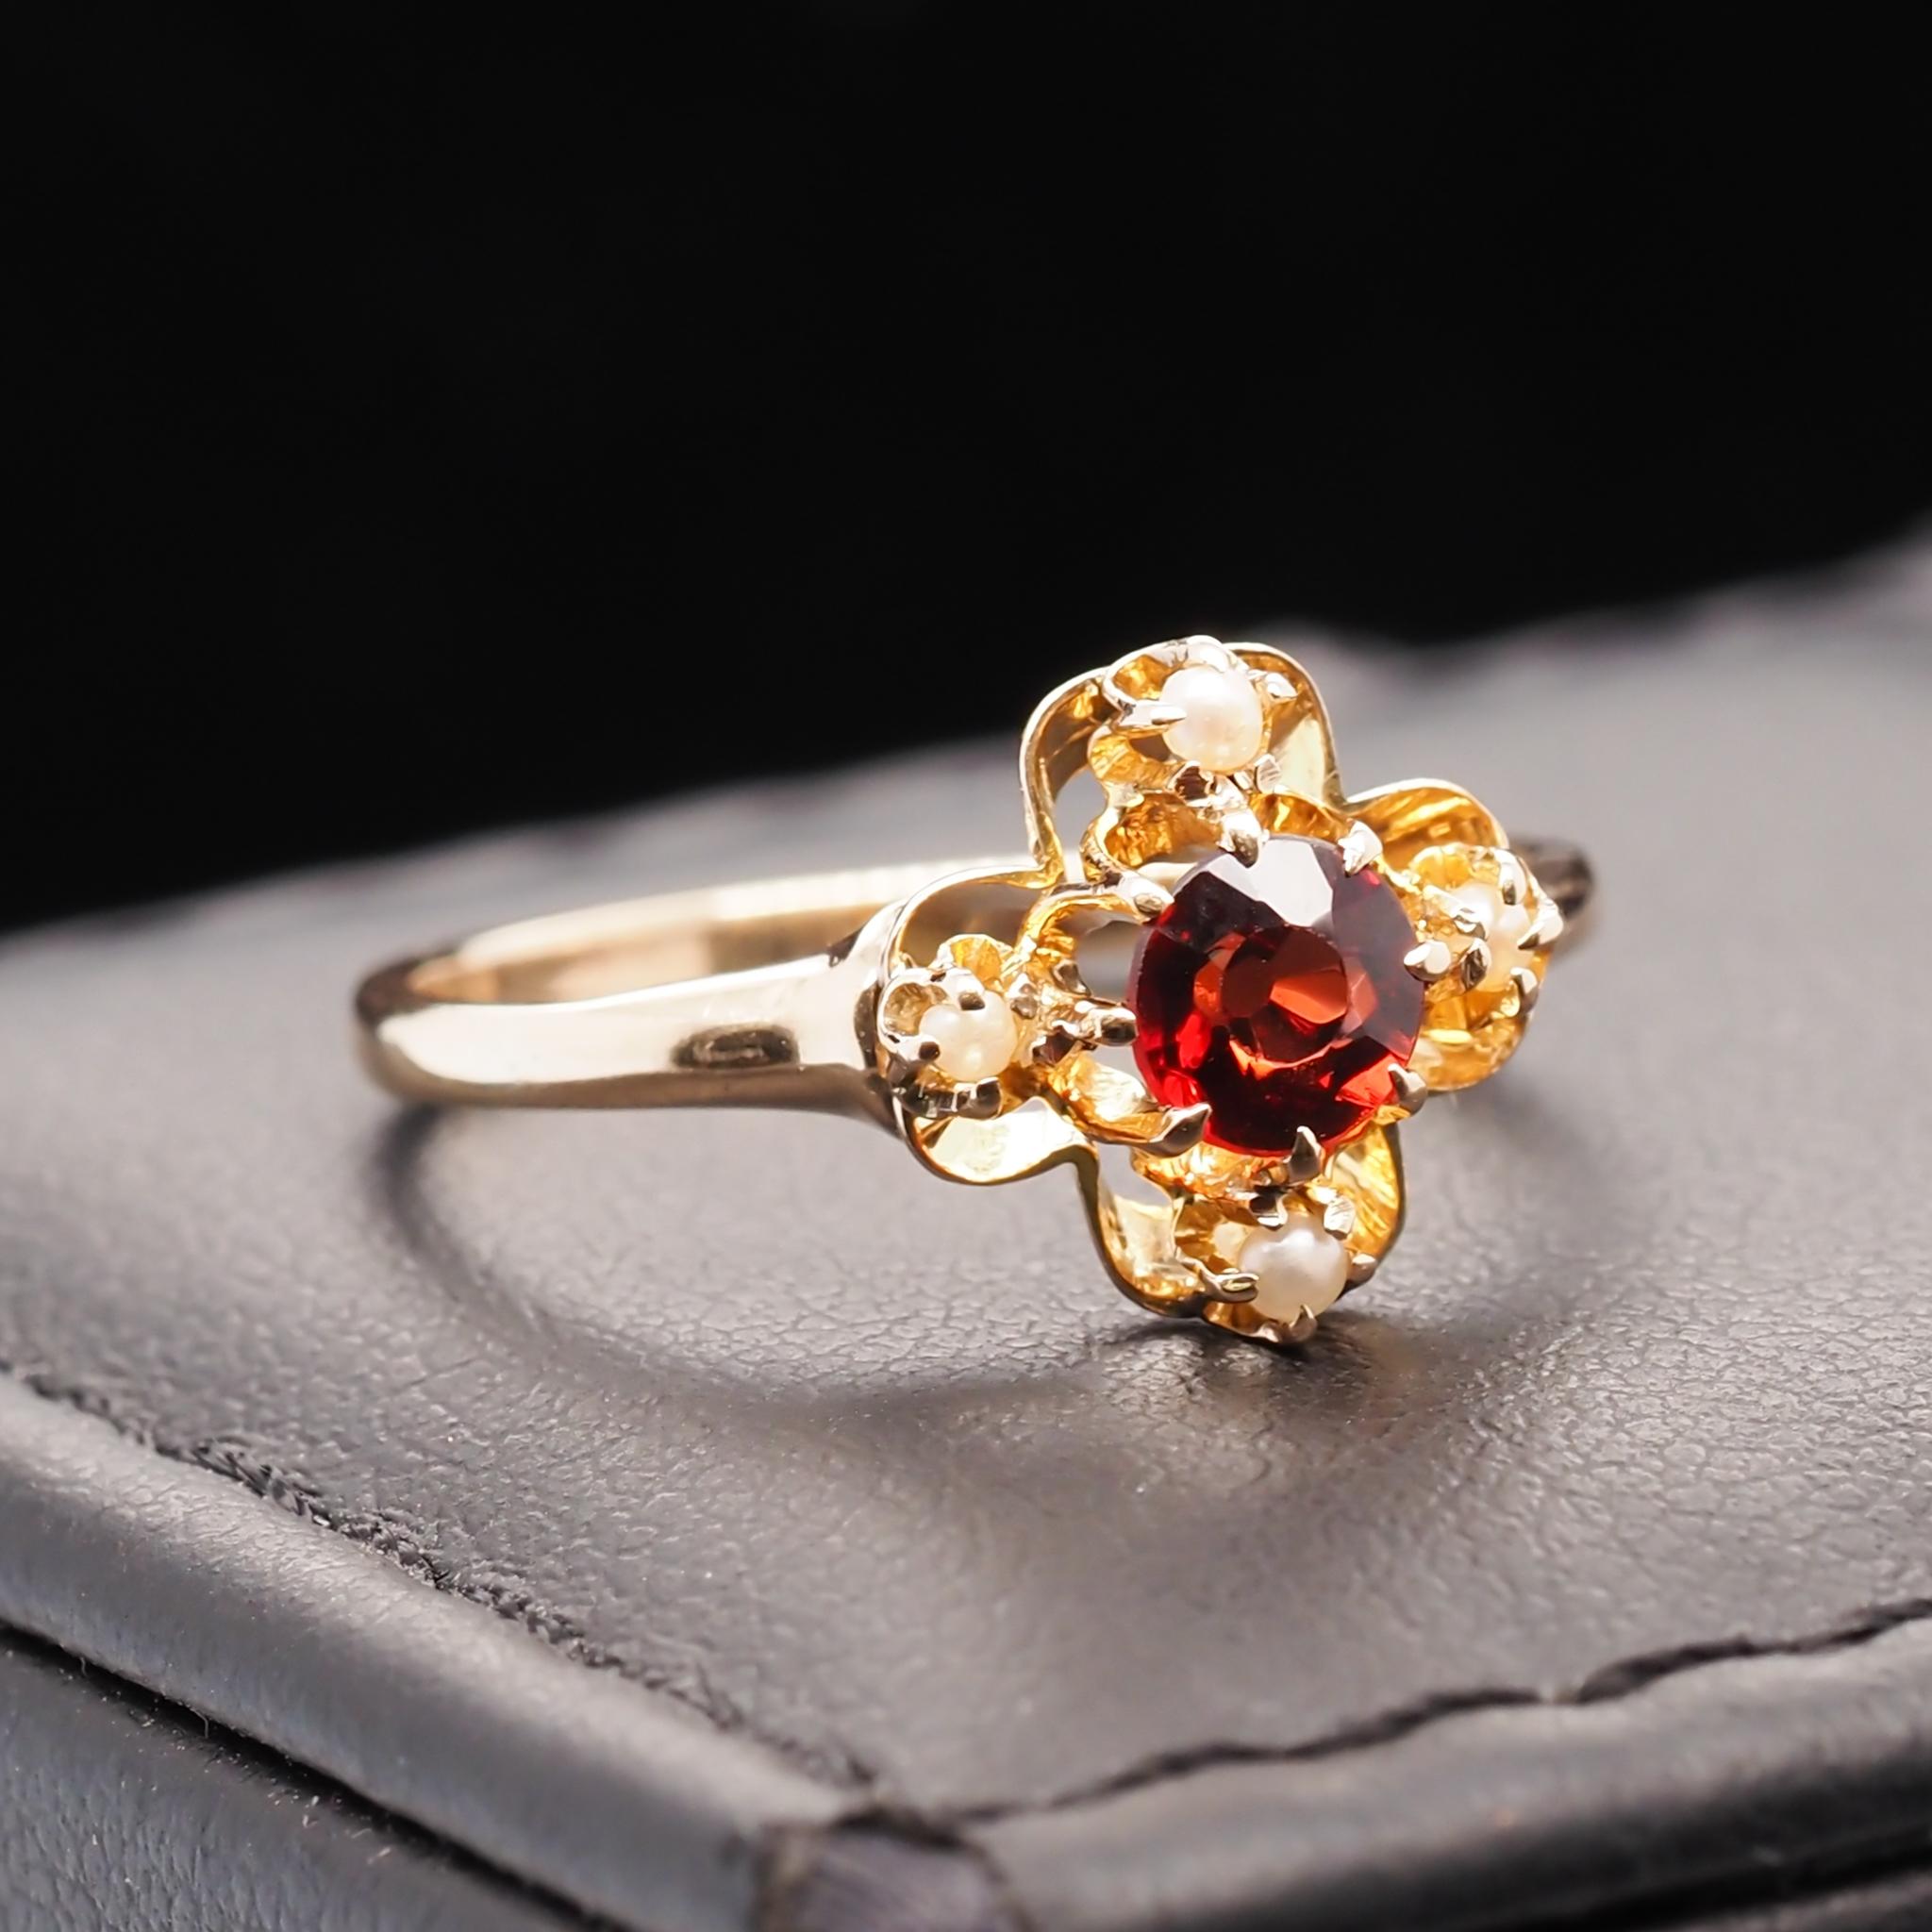 Year: 1940s

Item Details:
Ring Size: 6.5
Metal Type: 14k Yellow Gold  [Hallmarked, and Tested]
Weight: 1.9  grams

Garnet Details: 4.65mm, deep red, natural , old European cut

Band Width: 1.55mm
Condition:  Excellent